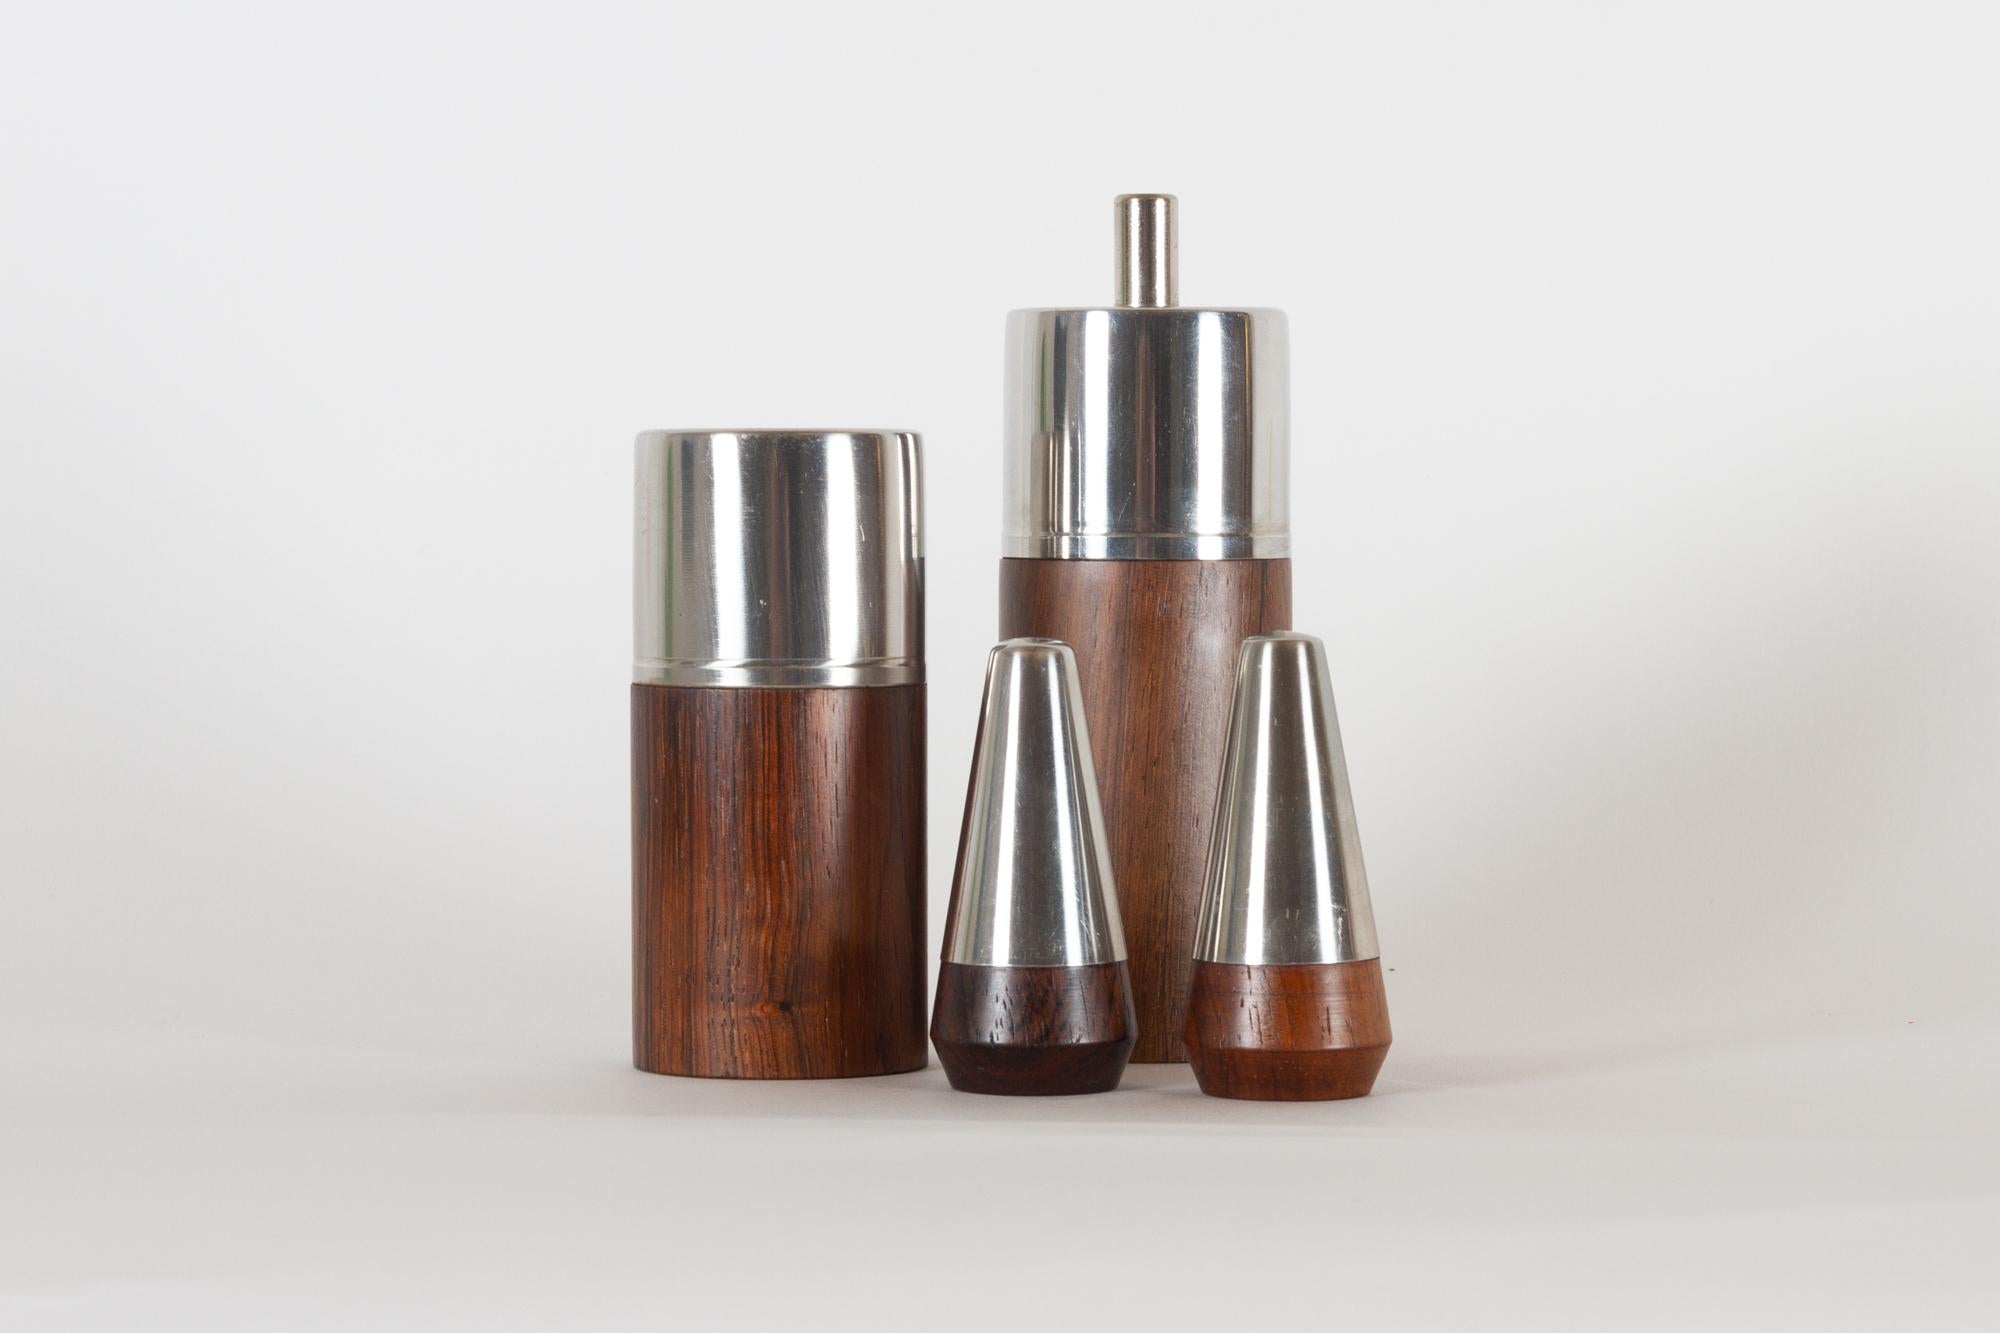 Vintage Danish salt and pepper sets, 1960s
Two sets of Danish modern rosewood and stainless steel salt and pepper sets. A large set with salt shaker and a pepper mill for the table and a small set of shakers for the breakfast tray.
Measures: